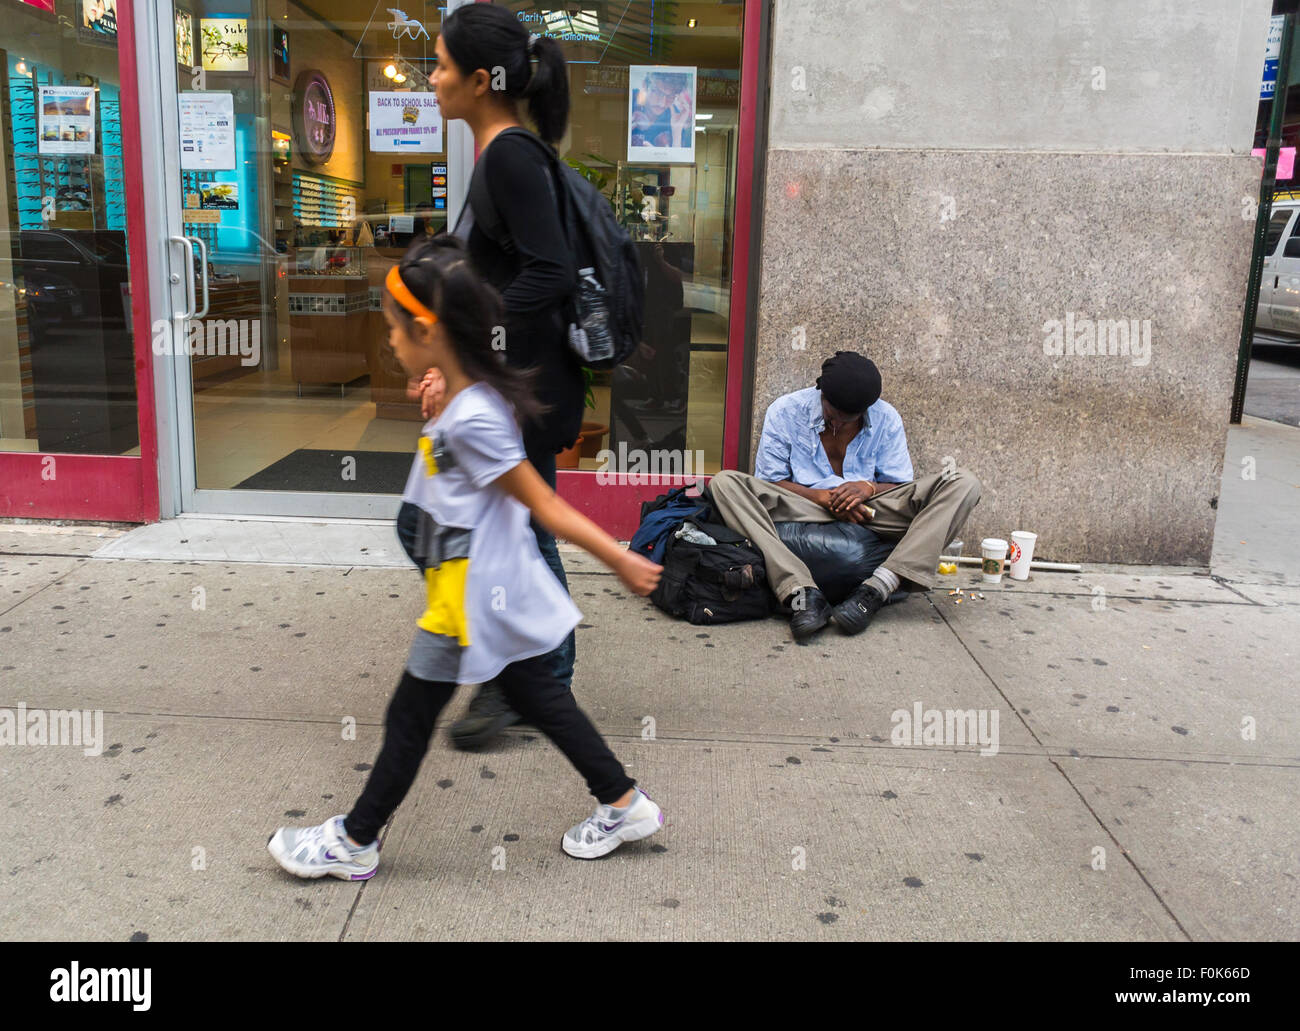 New York City, USA, Street Scenes, Chinatown District, Woman with Child, Walking by Homeless man sitting on sidewalk begging, social care crisis, poverty usa Stock Photo